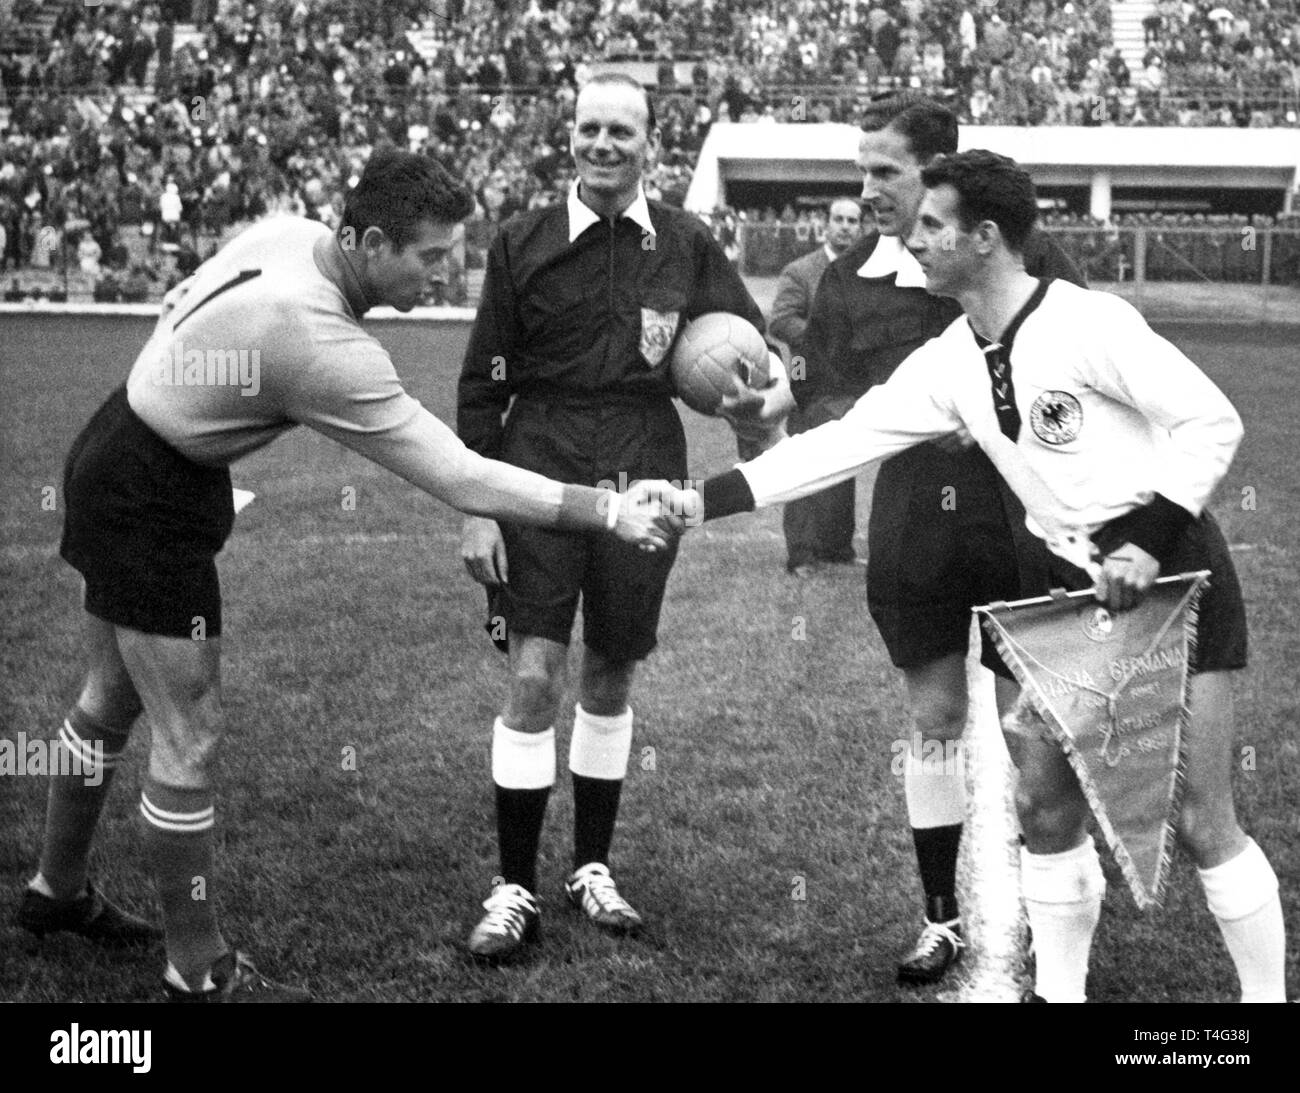 The team captains German striker Hans Schaefer (R) and Italian goalkeeper Lorenzo Buffon (L) are shaking hands prior to the 1962 FIFA World Cup group round match Germany versus Italy (0:0) at the Santiago de Chile's National stadium on May 31st. Scottish referee Bob Davidson in the center with the ball. | usage worldwide Stock Photo